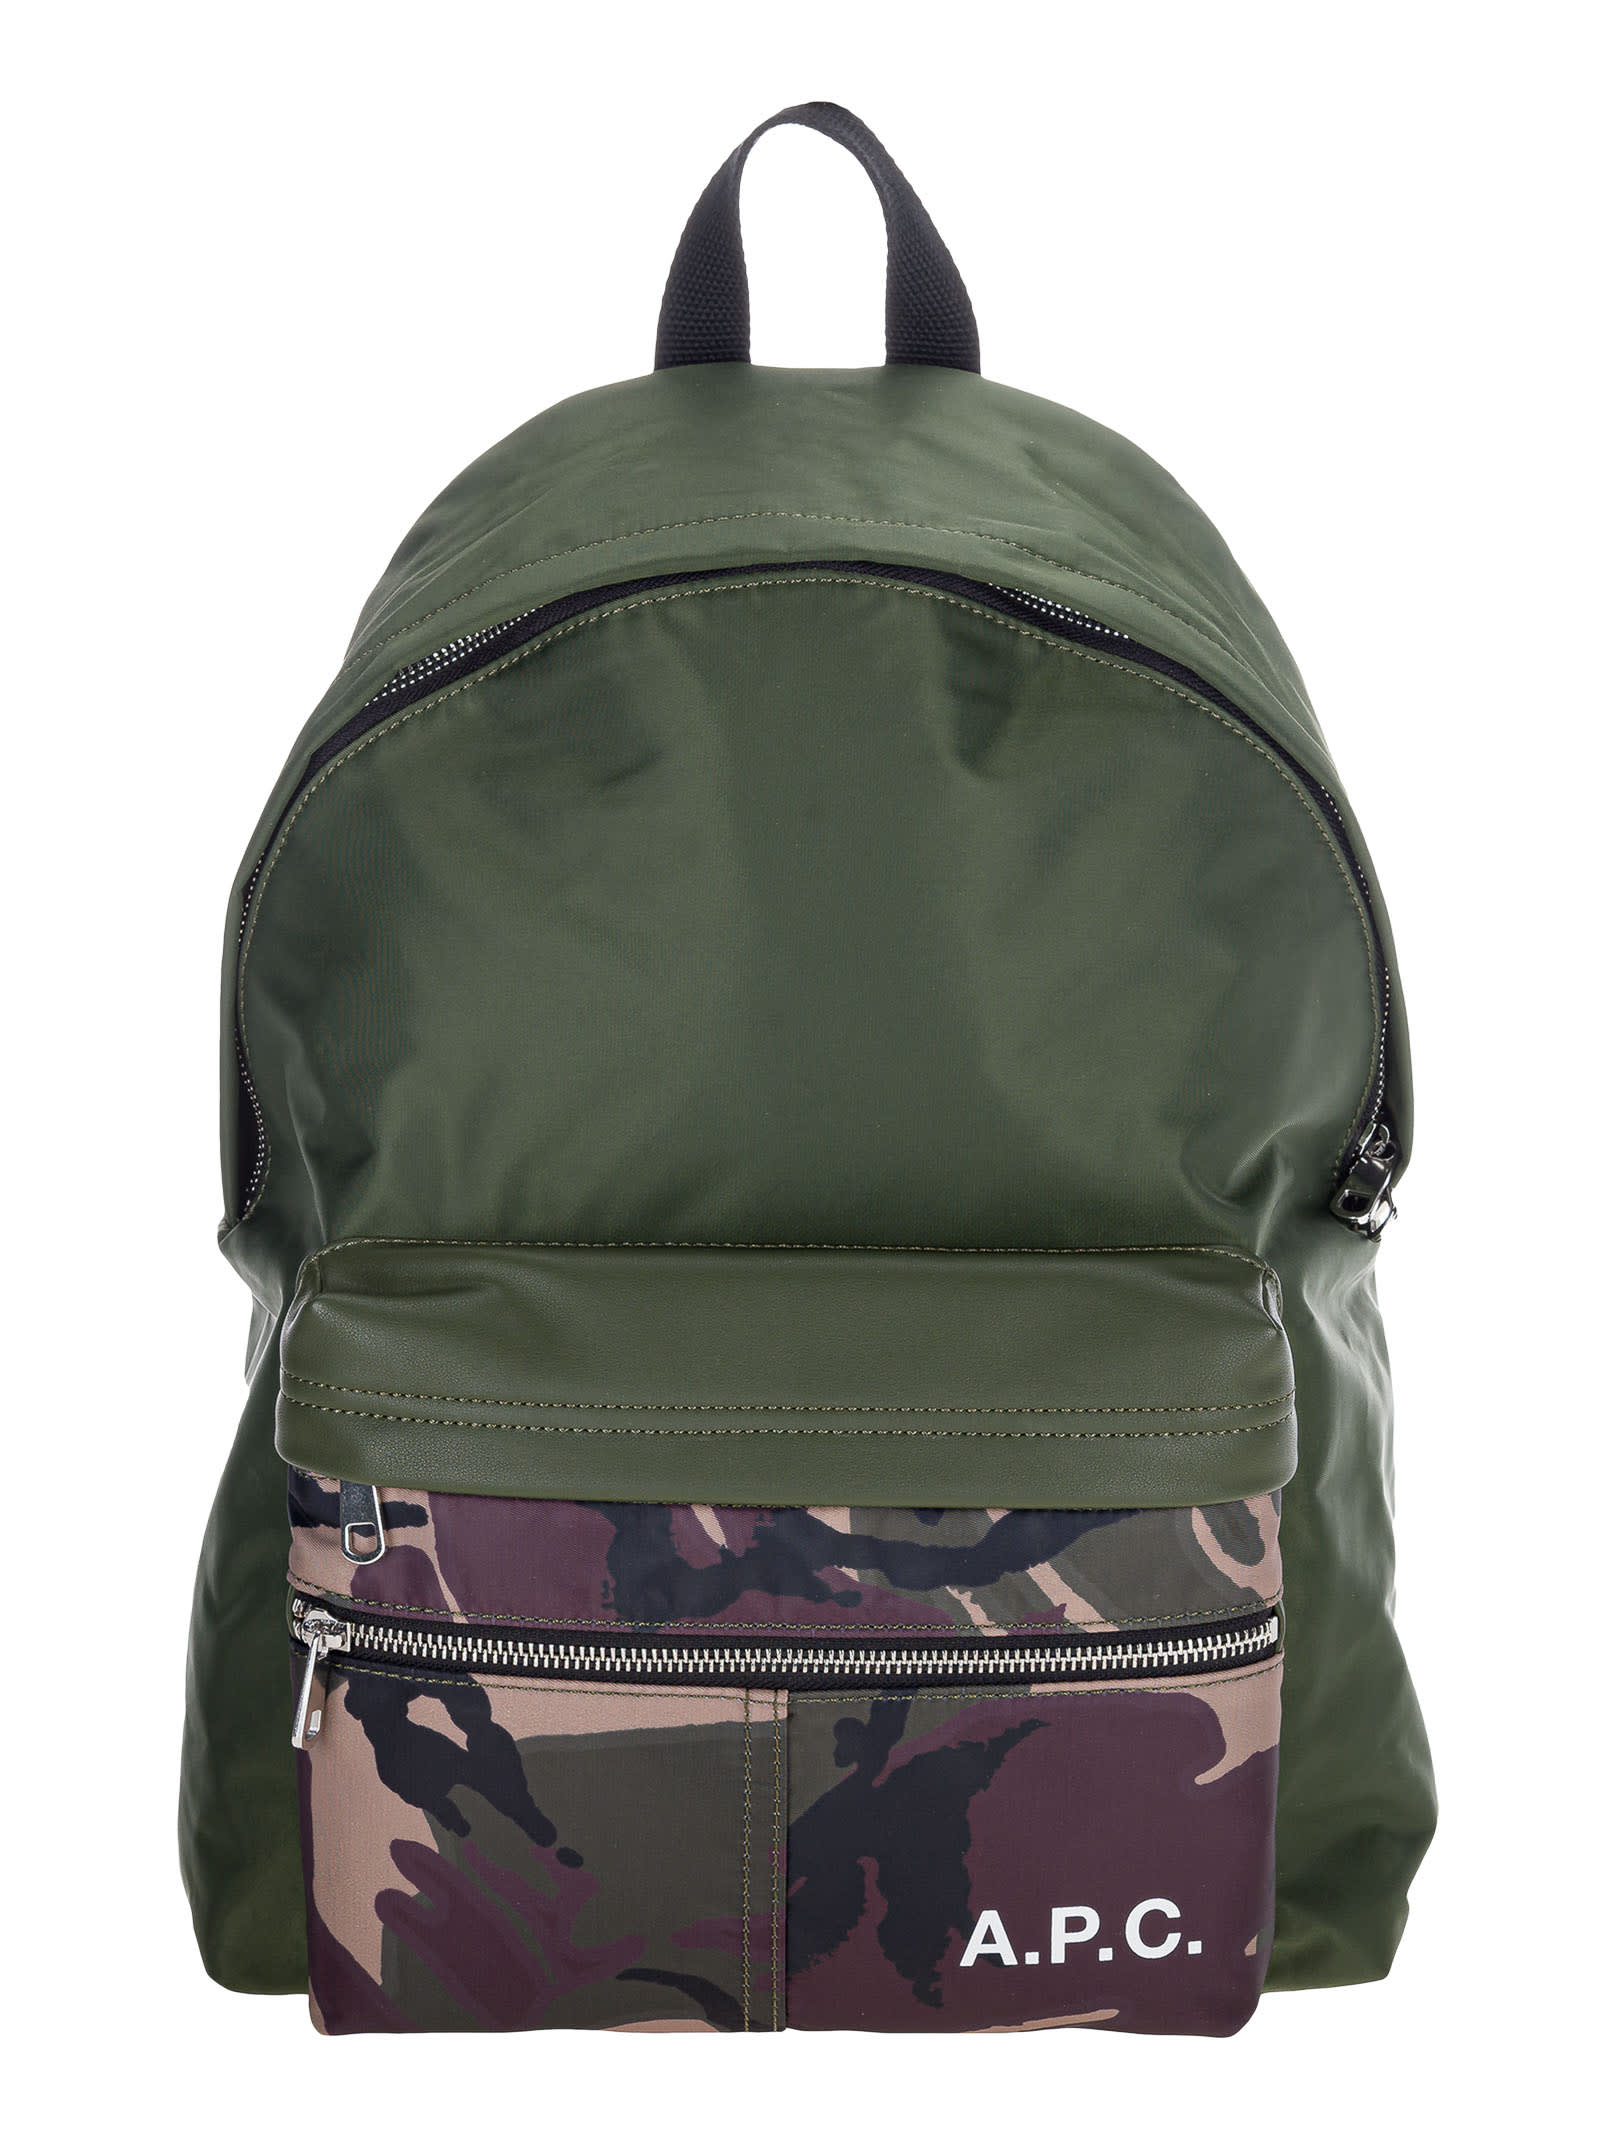 APC A.P.C. CAMOUFLAGE CAMDEN BACKPACK,H62119PAAEPJAC